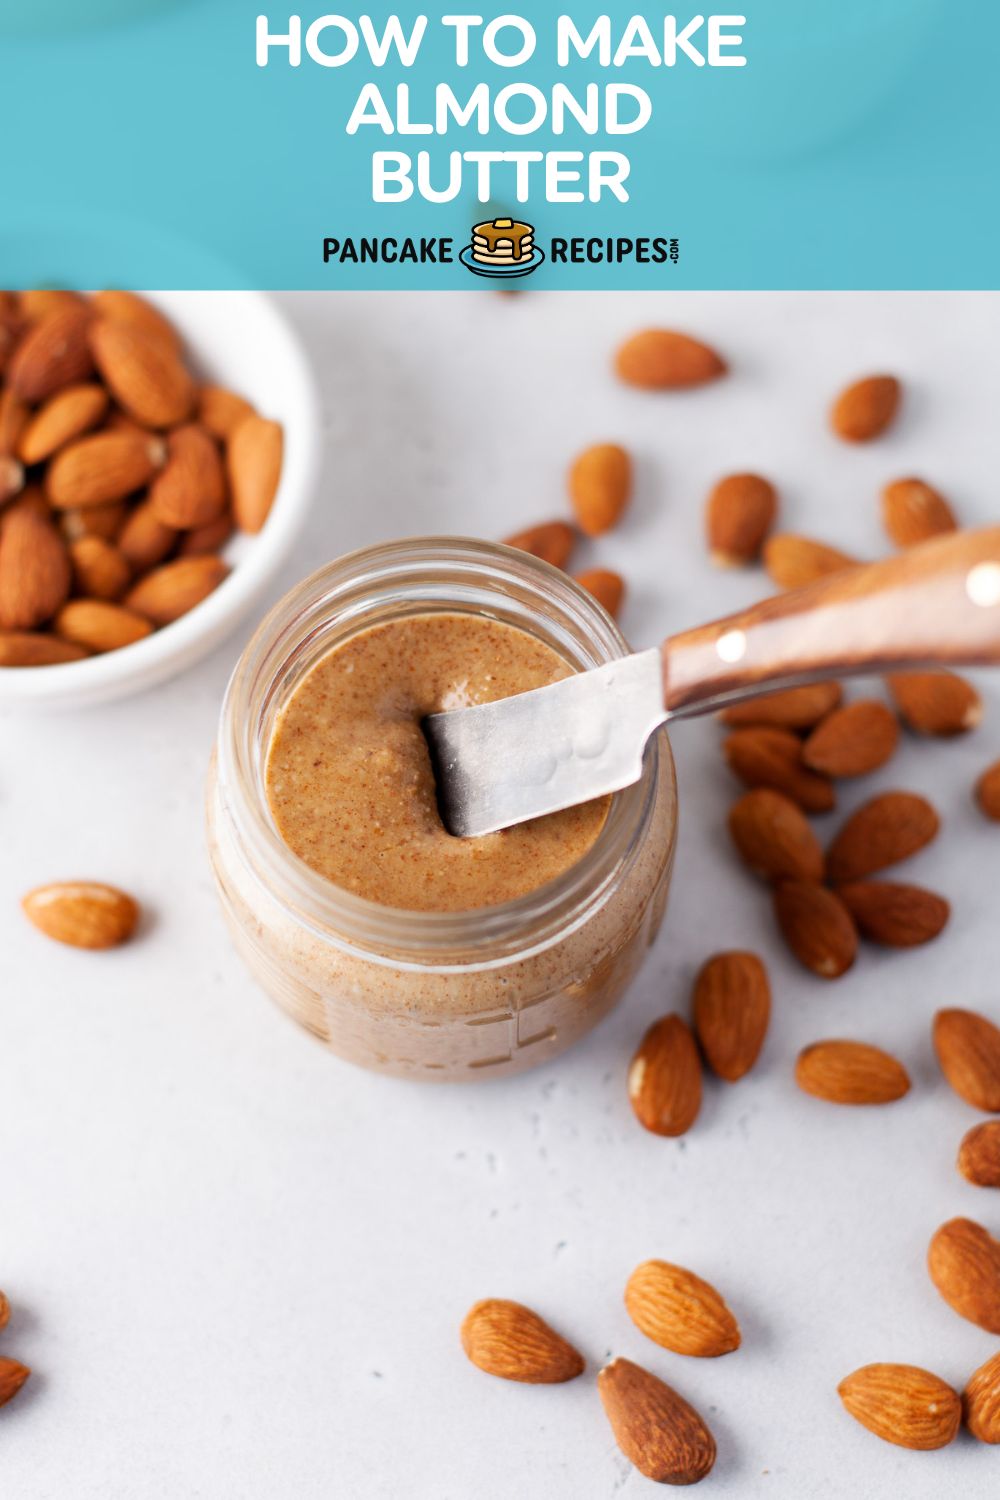 How to make almond butter, pinterest image.